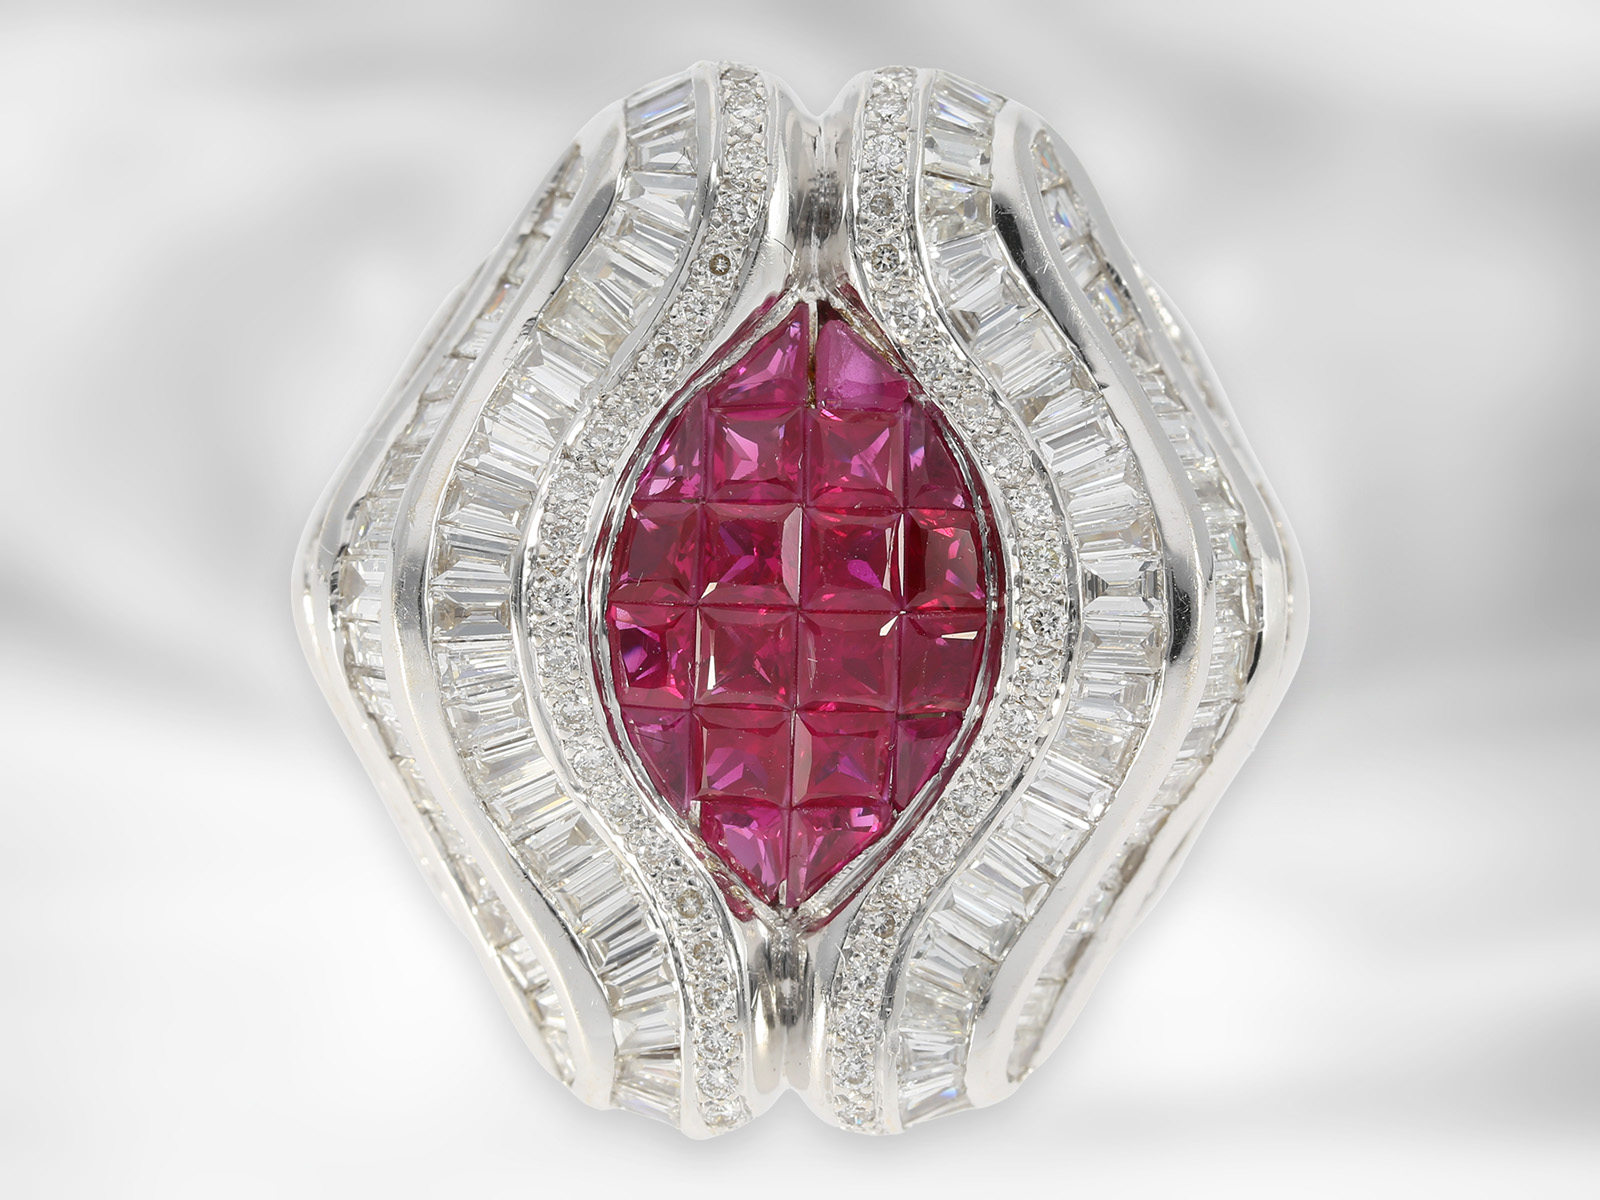 Ring: extravagant luxurious diamond/ruby ring, total approx. 5.49ct, 18K white gold, sophisticated g - Image 3 of 8